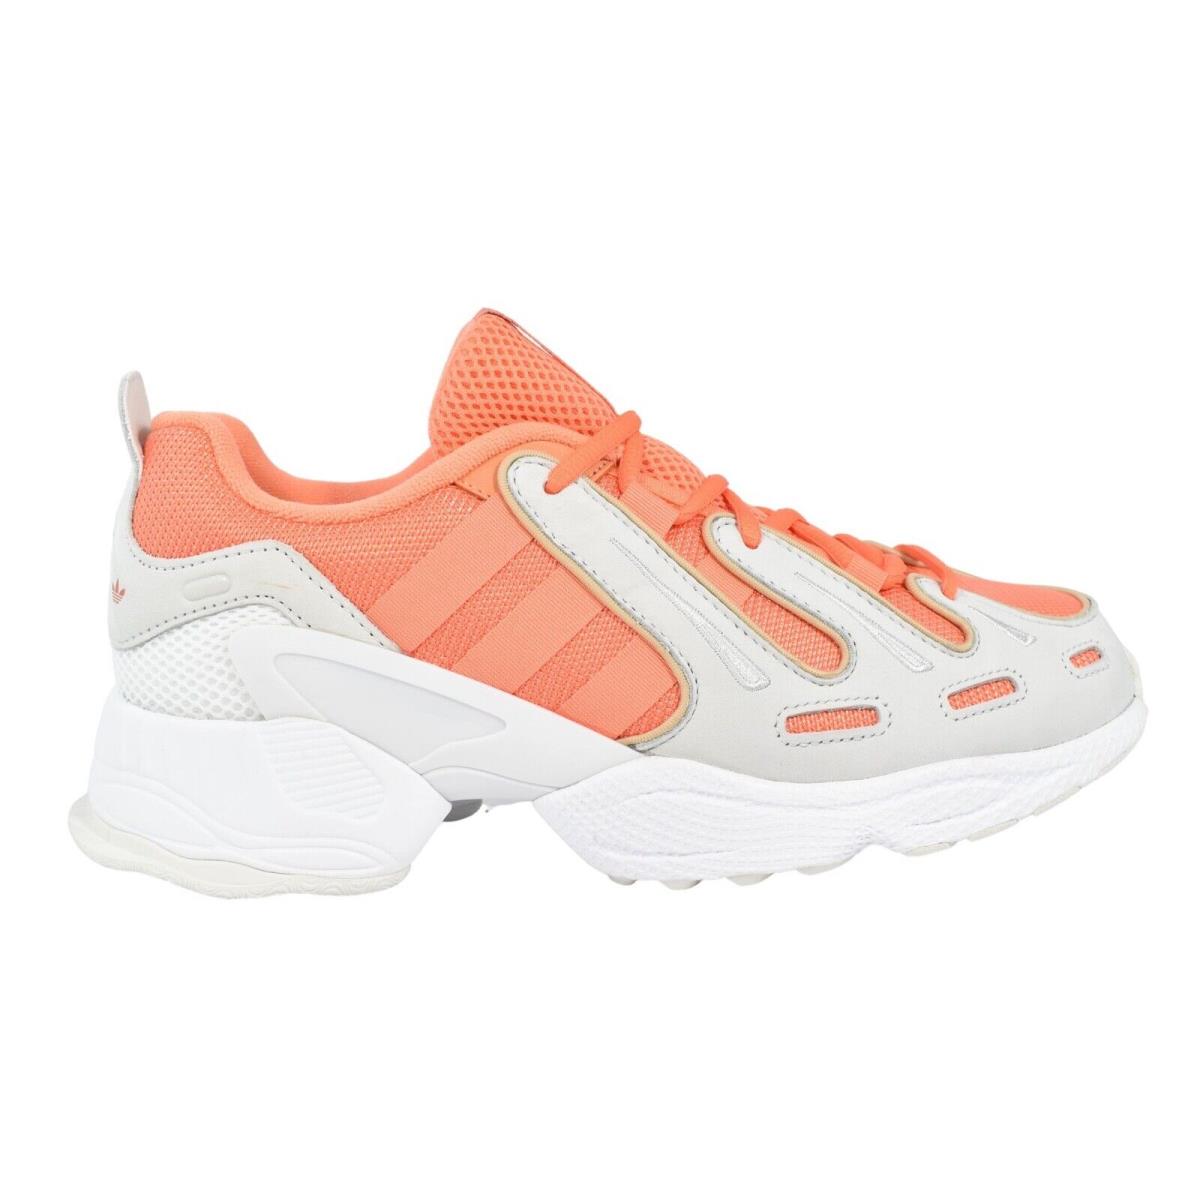 Adidas Men`s Eqt Gazelle `semi Coral` Style: EE5034 Running Sneakers